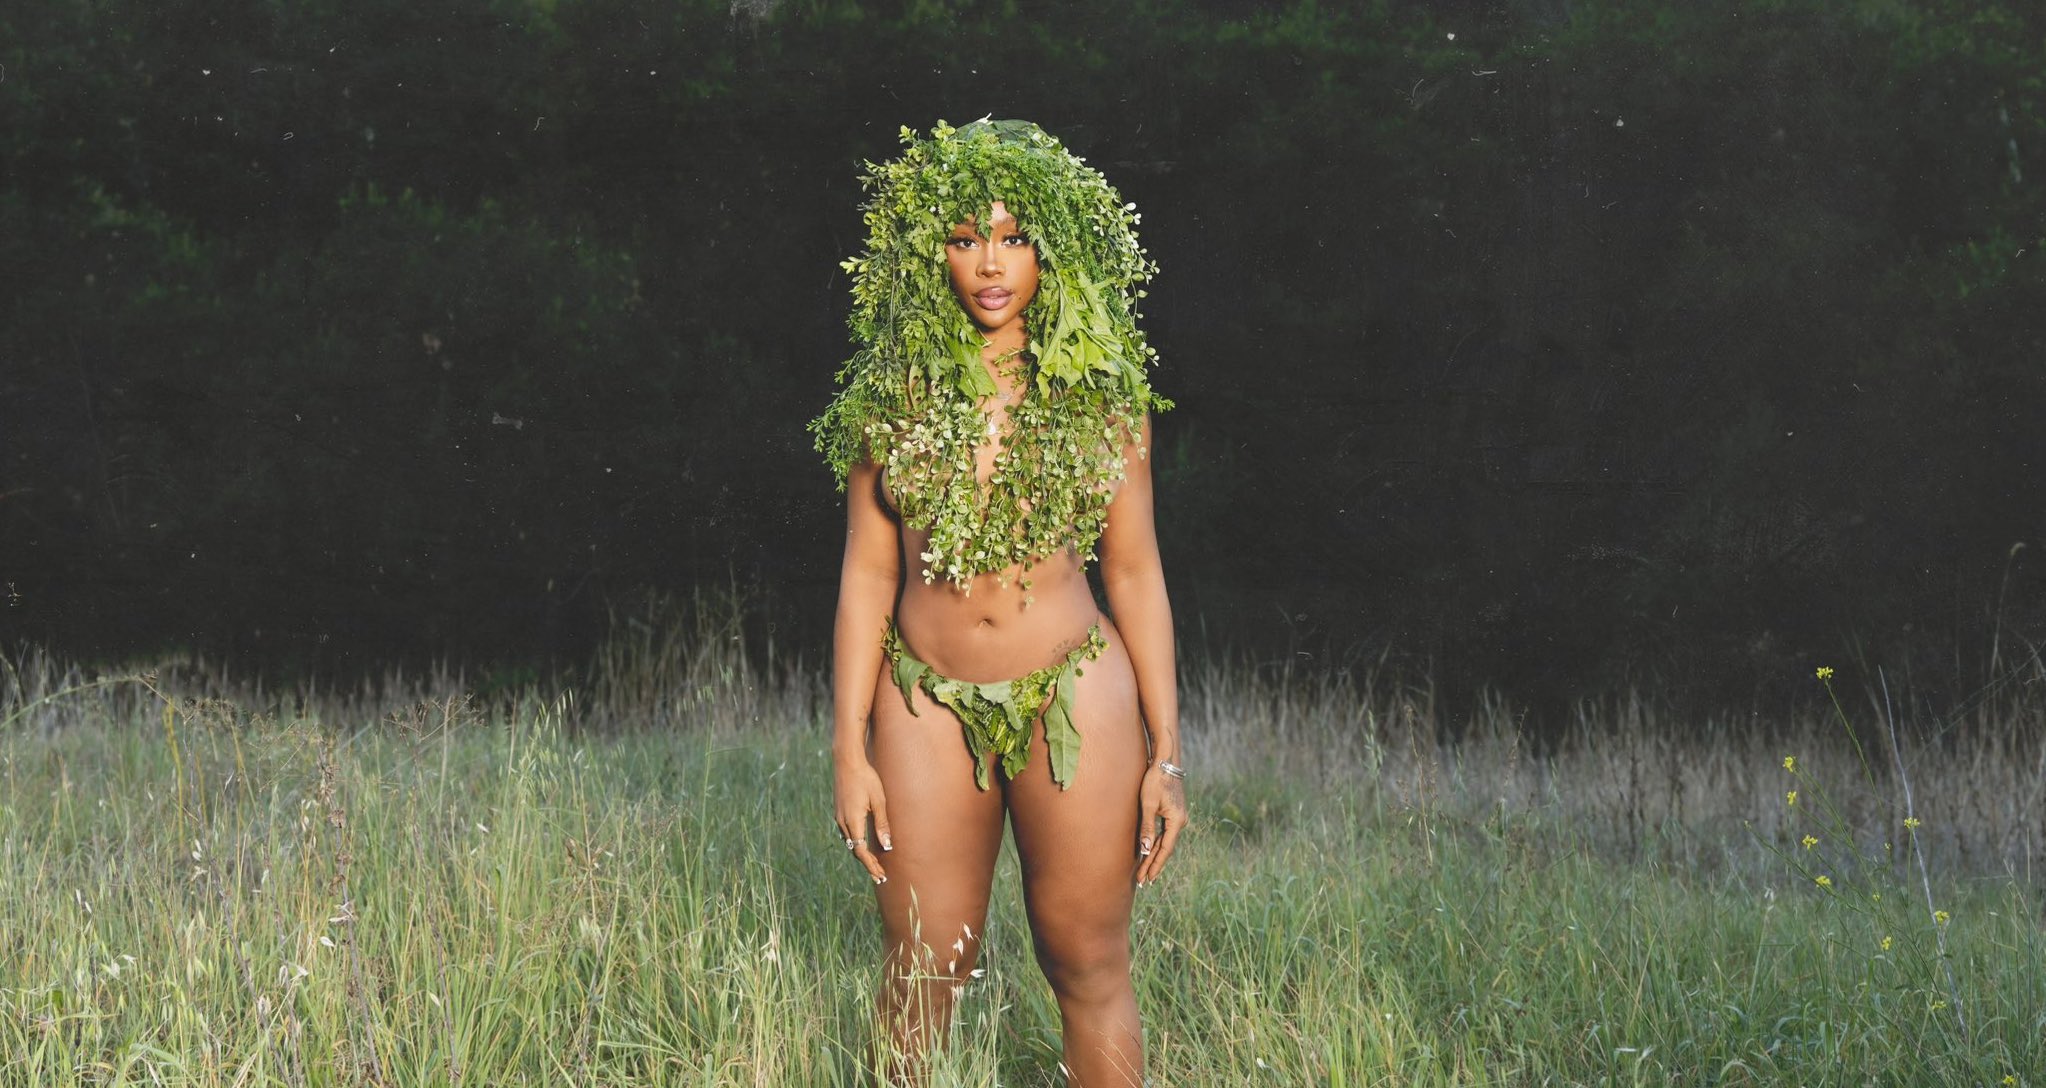 SZA Scraps ‘SOS’ Deluxe, Vows To Start ‘LANA’ “From Scratch”